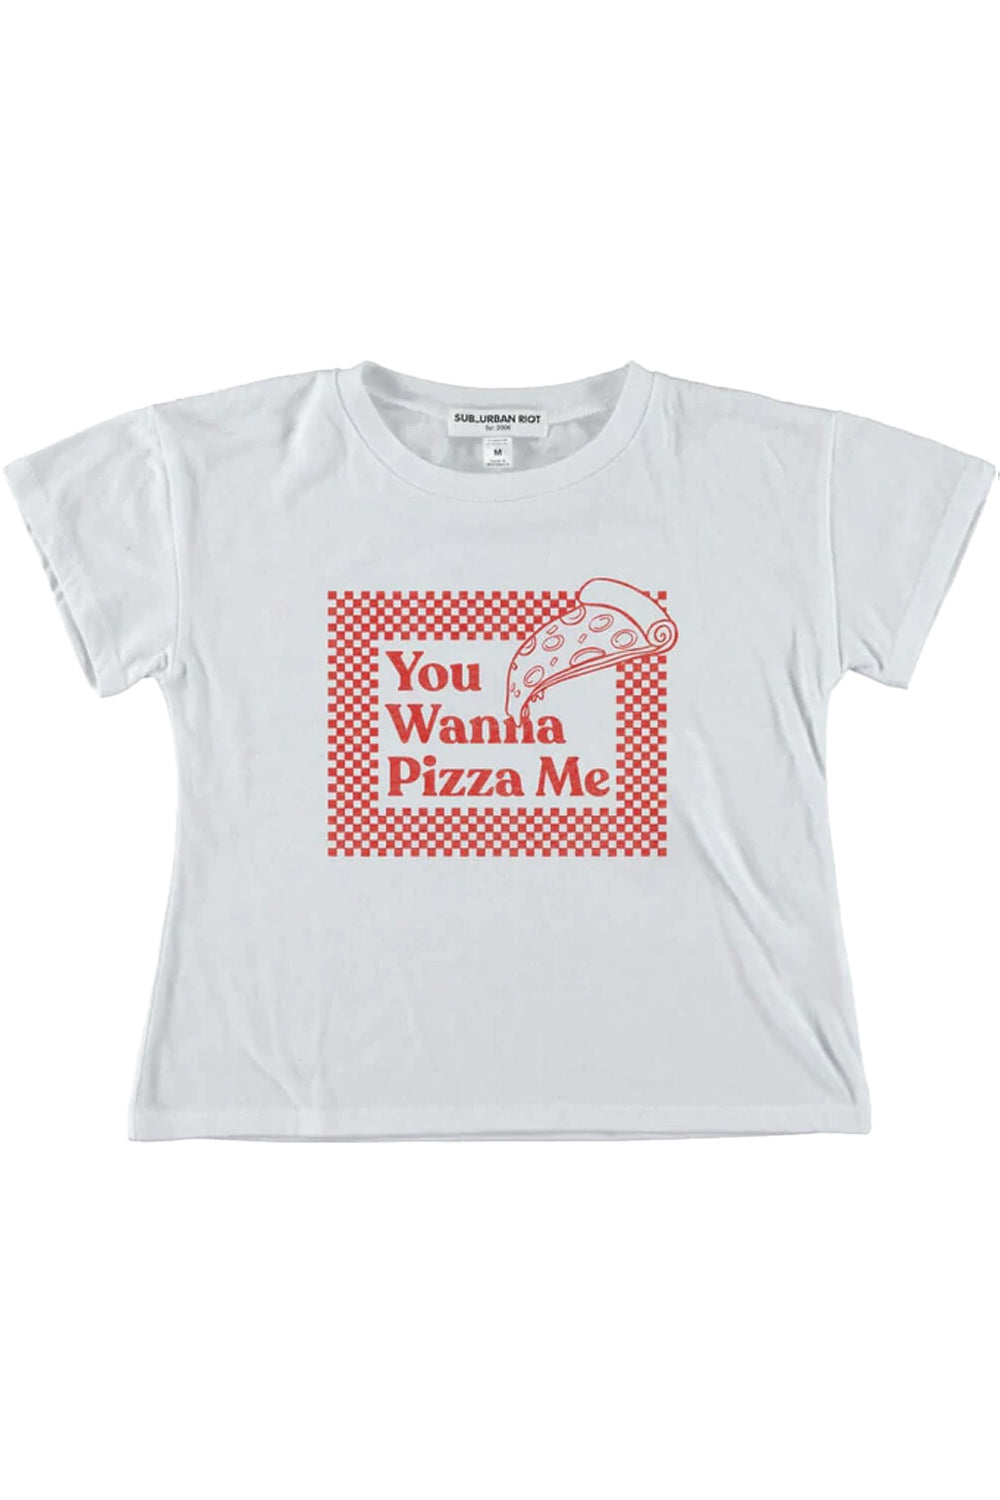 WANNA PIZZA ME YOUTH SIZE CROP TEE